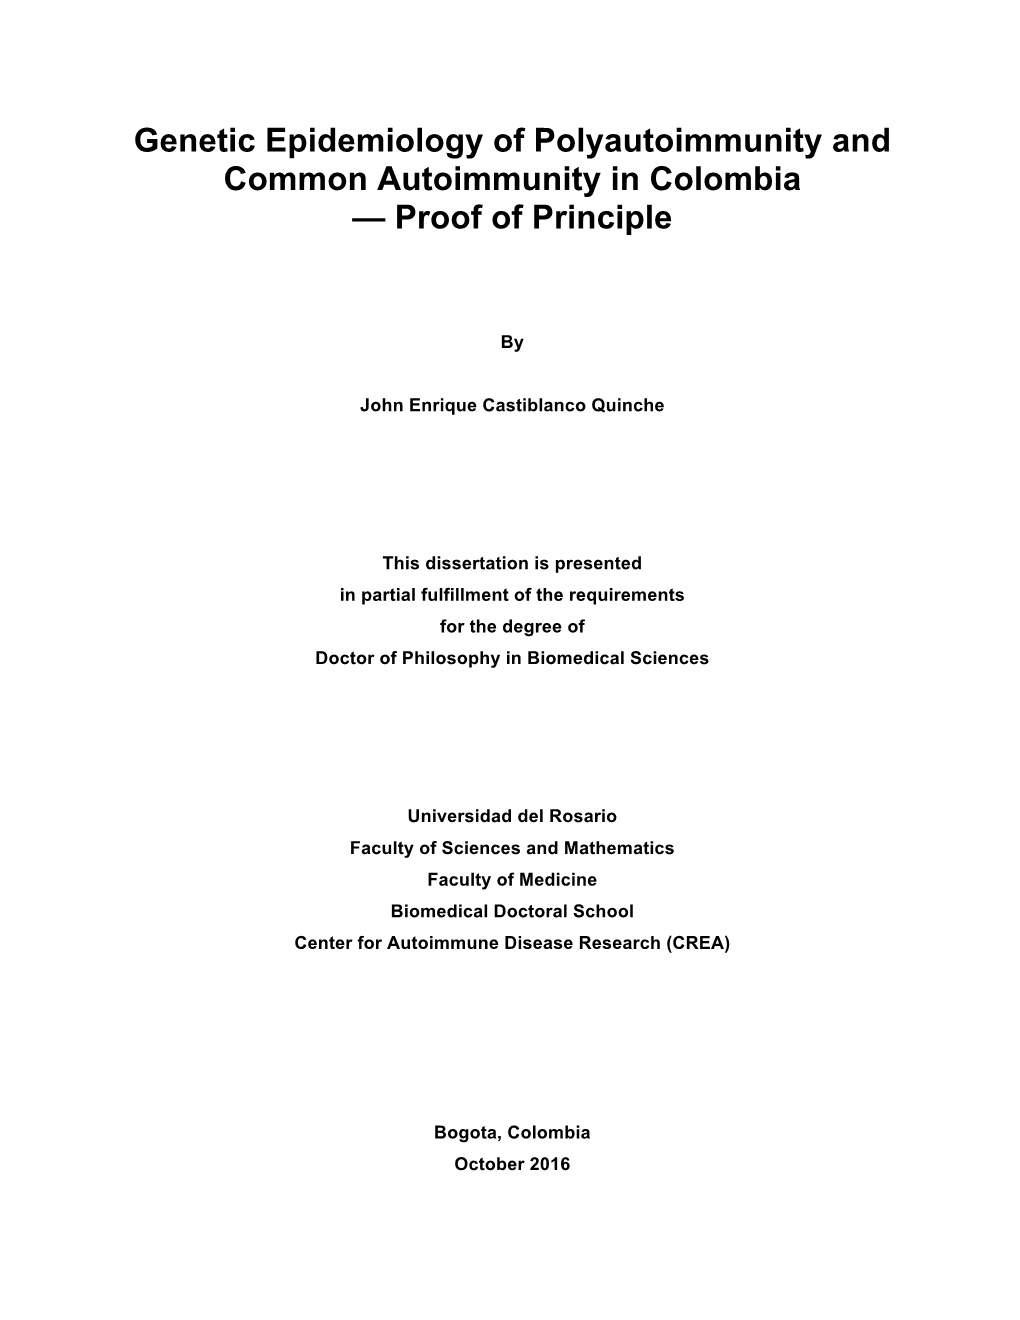 Genetic Epidemiology of Polyautoimmunity and Common Autoimmunity in Colombia — Proof of Principle